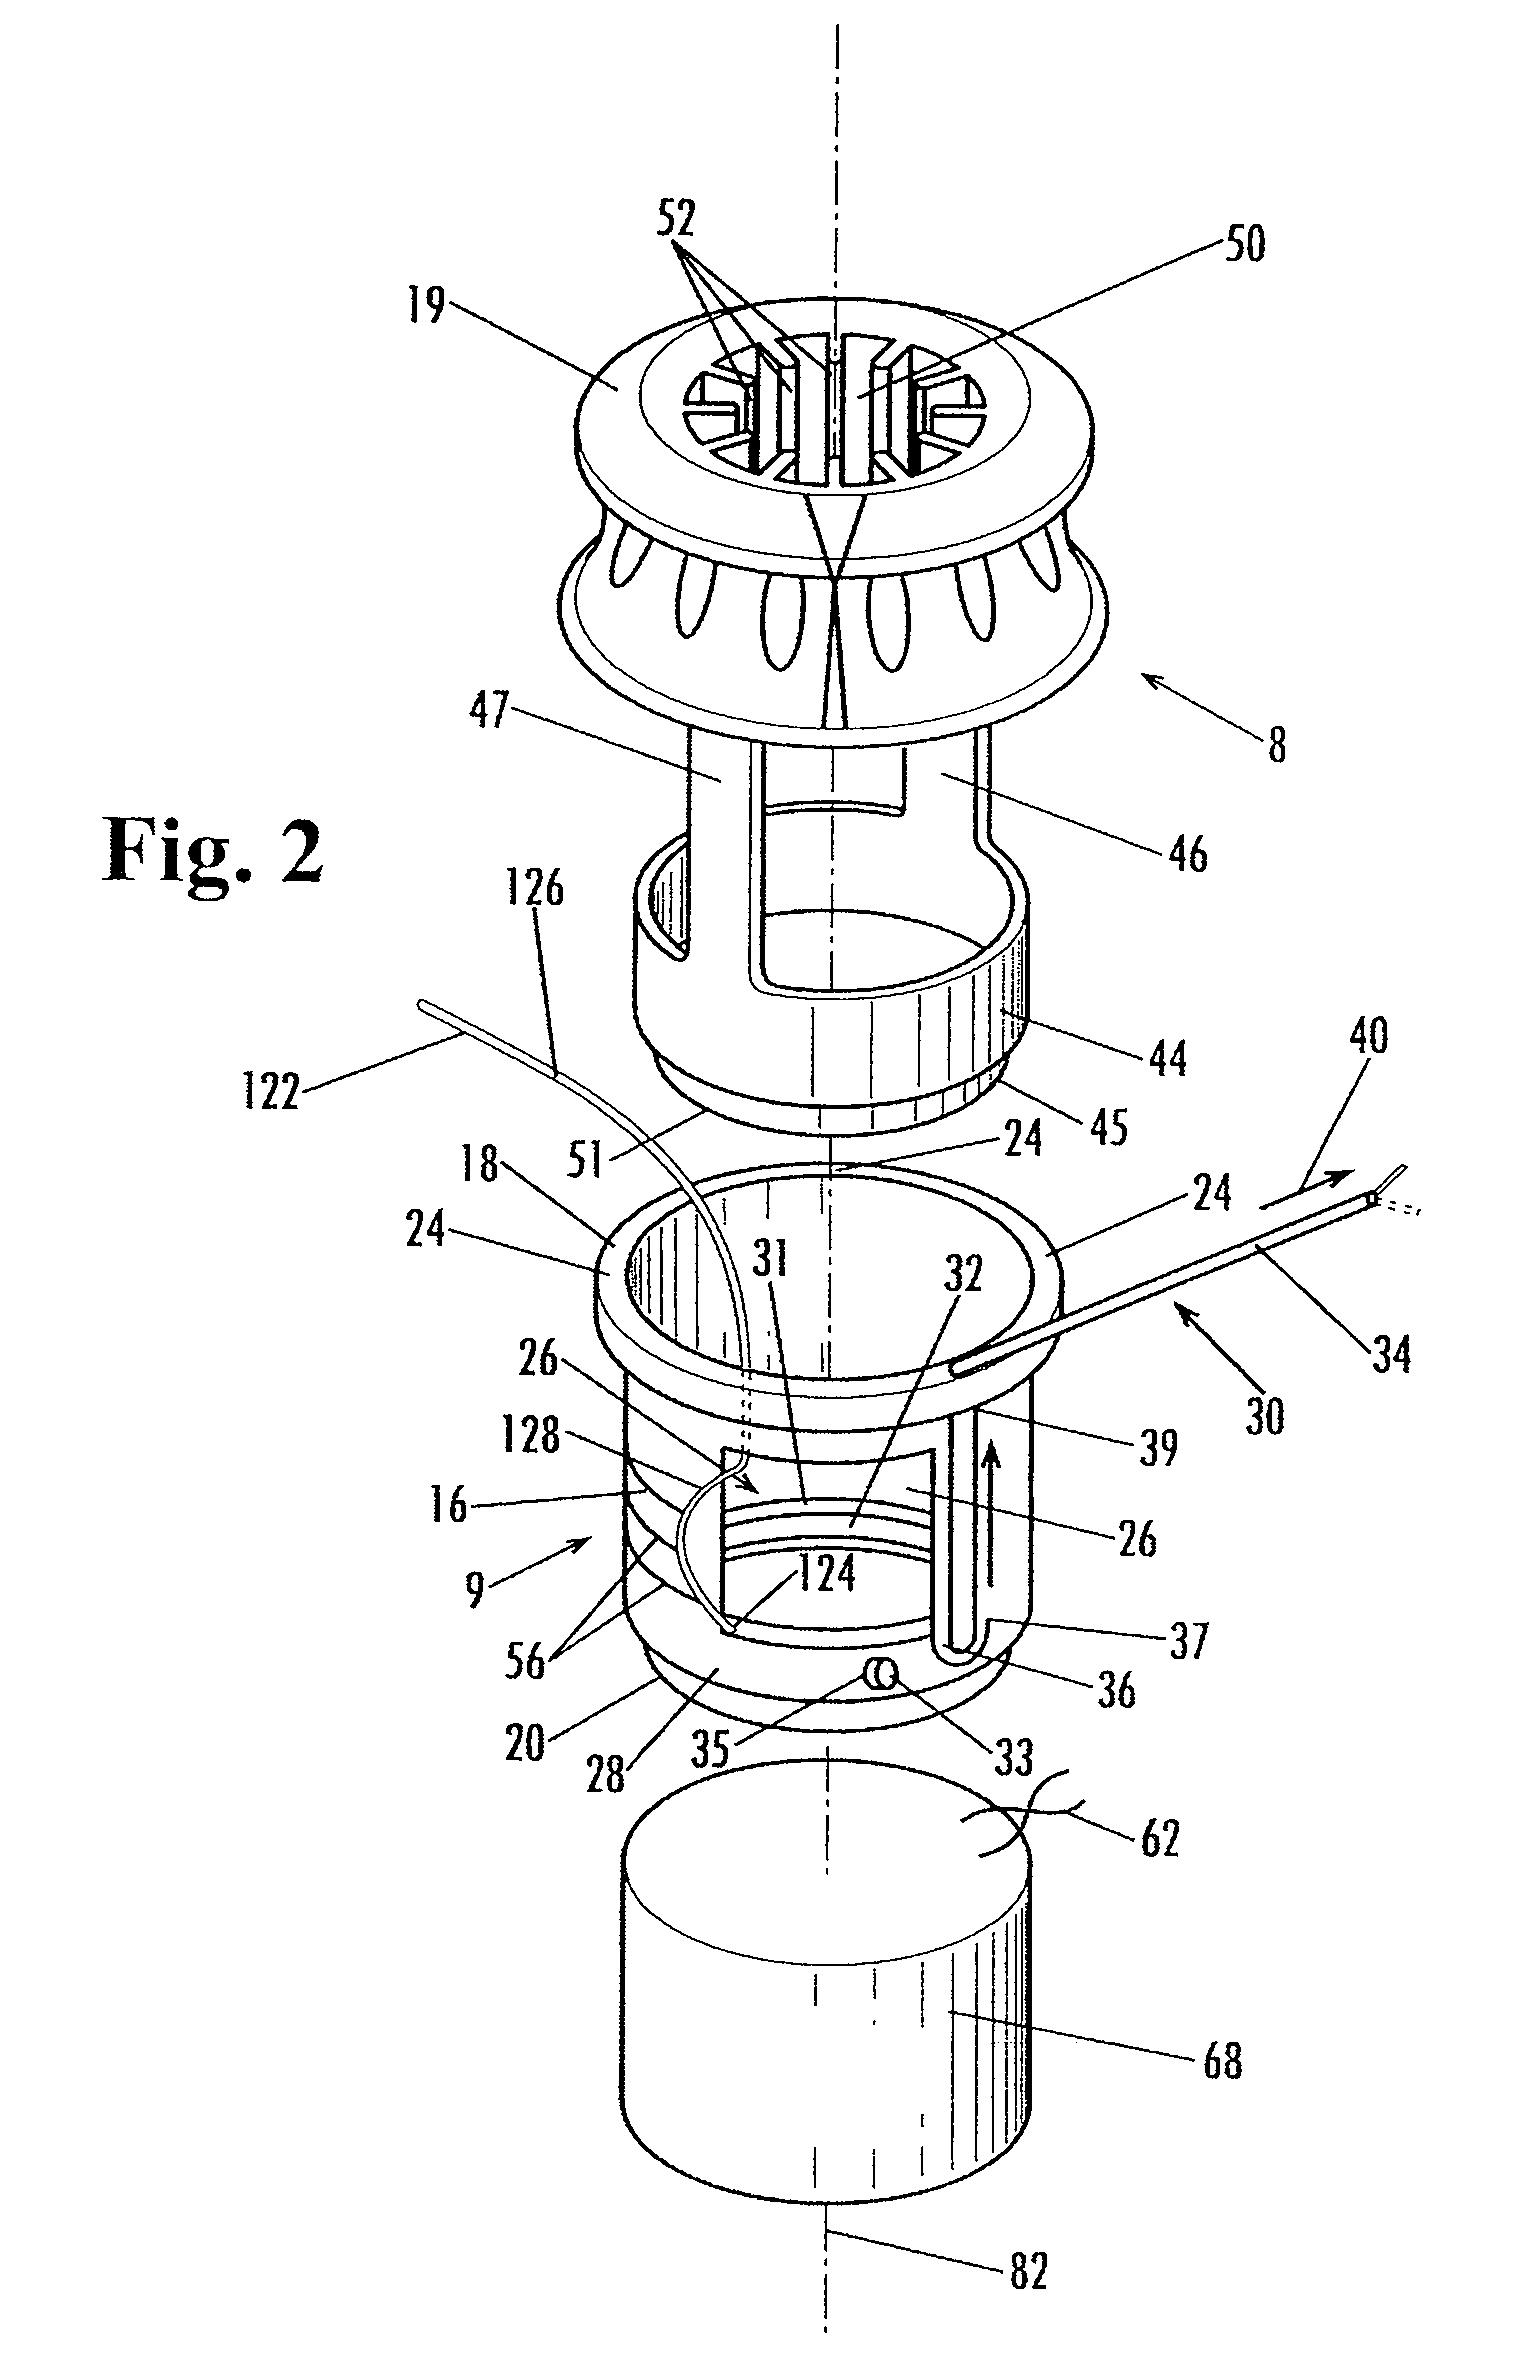 Surgical instrument for detecting, isolating and excising tumors